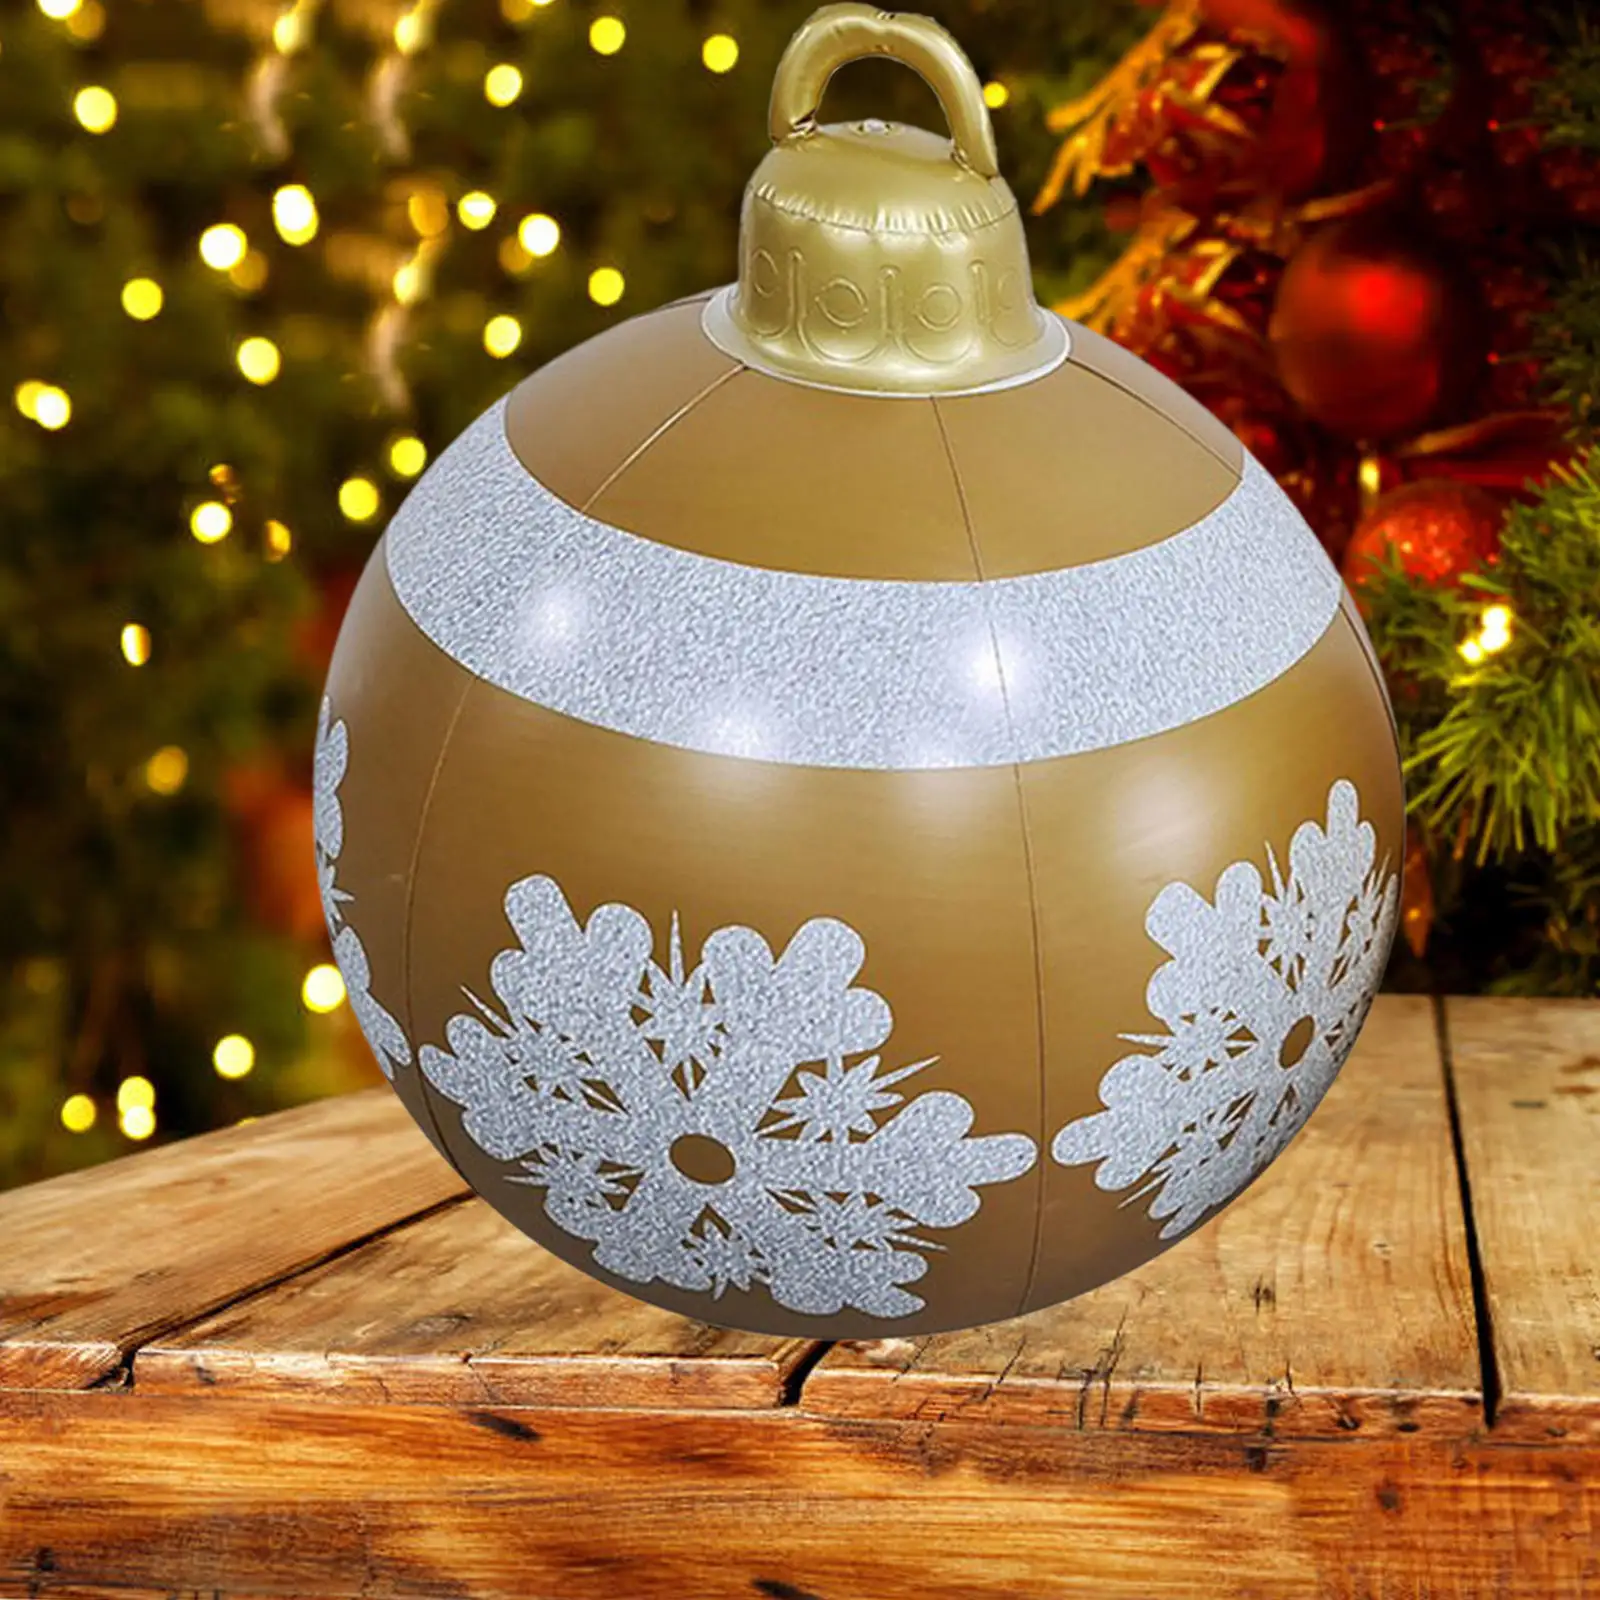 23.6inch Giant Christmas Inflatable Ball Ornament Decorative PVC for Indoor Lawn